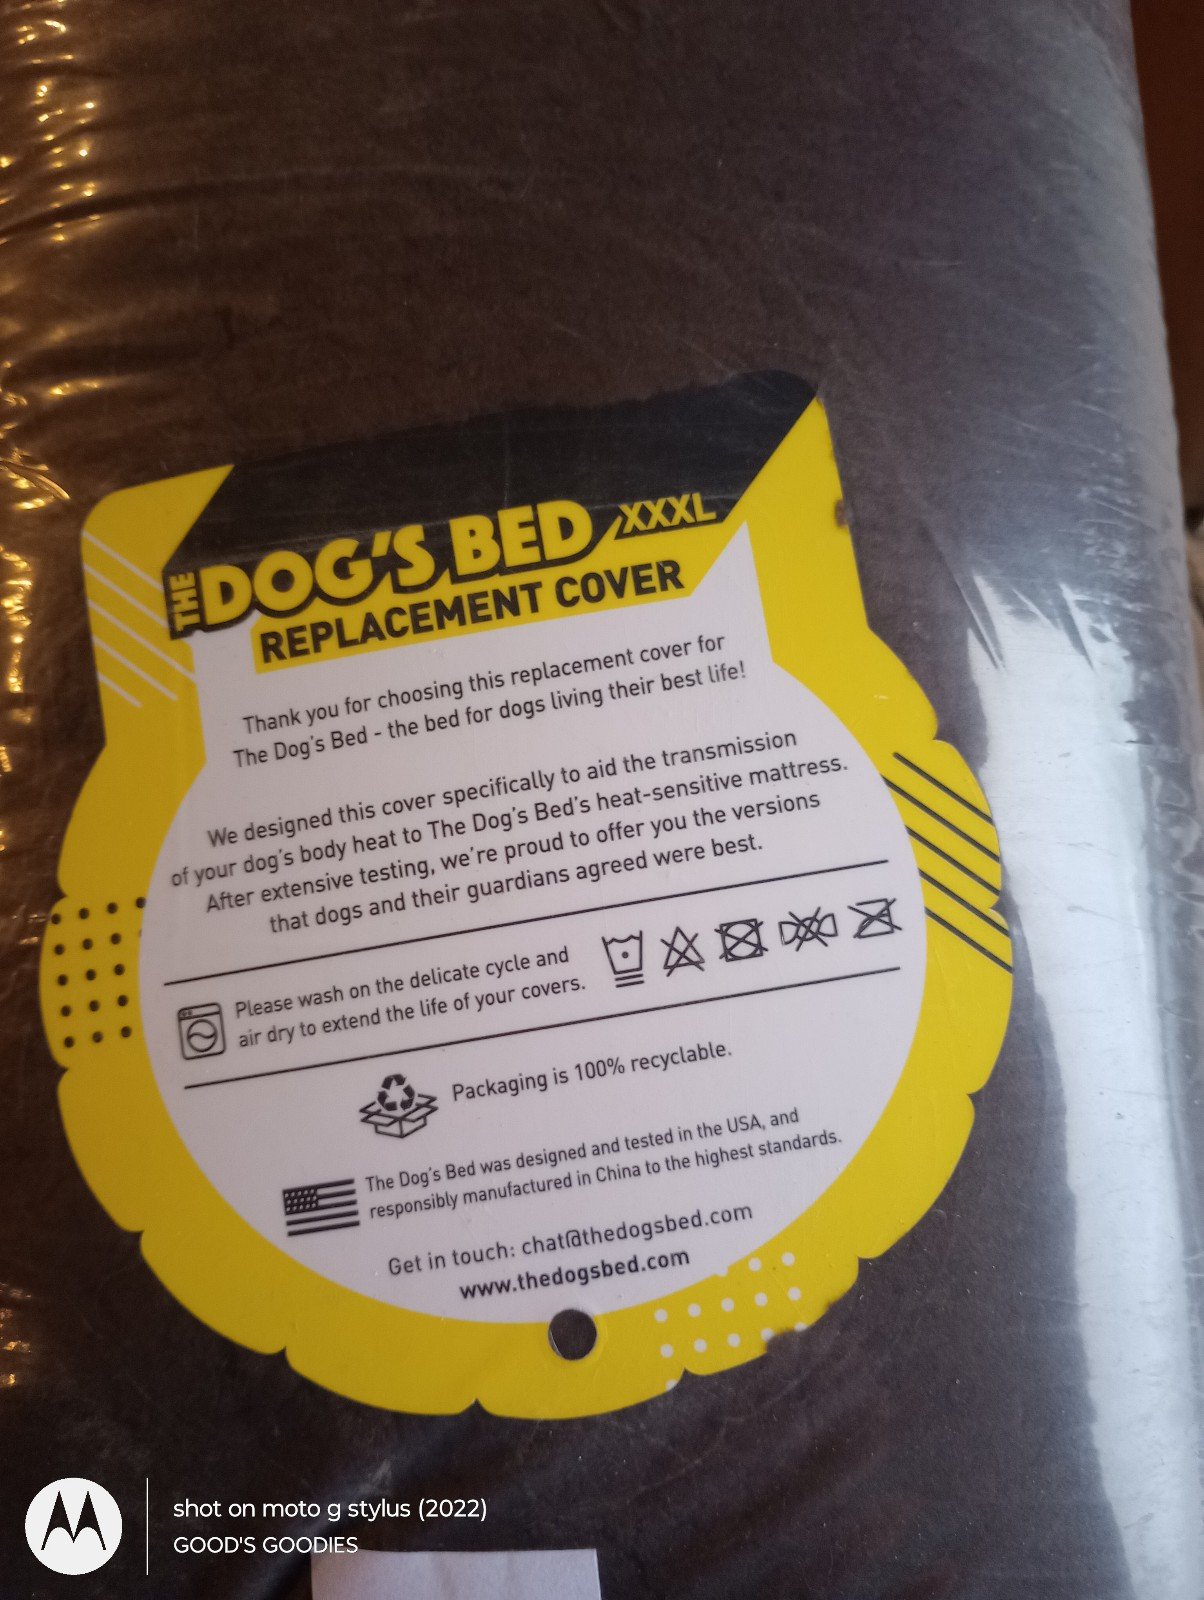 Xxxl dog bed replacement cover QsSeyulTs